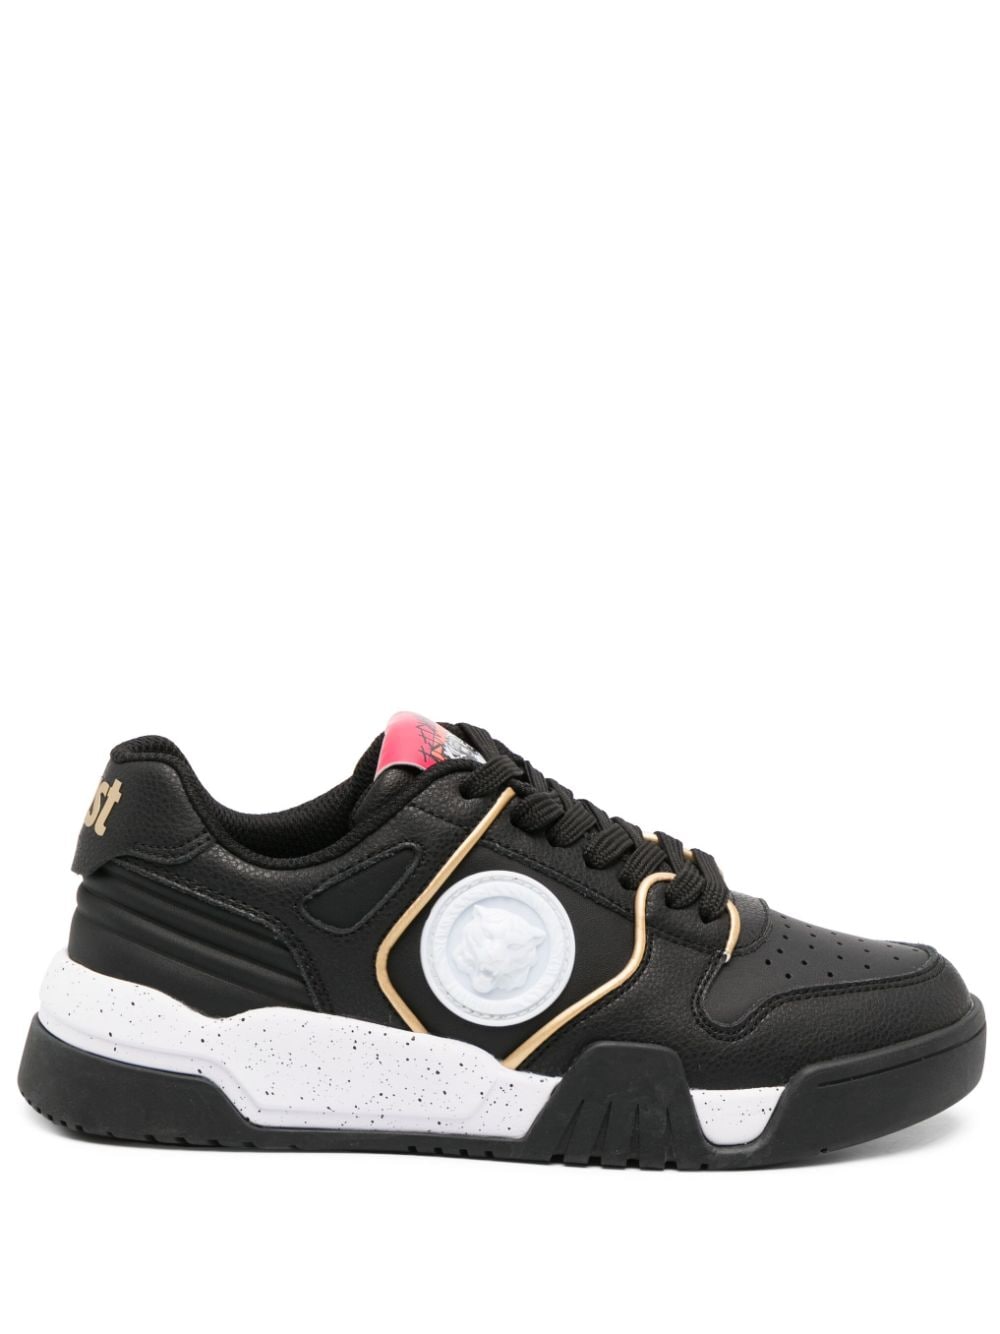 Tiger Head-motif leather sneakers